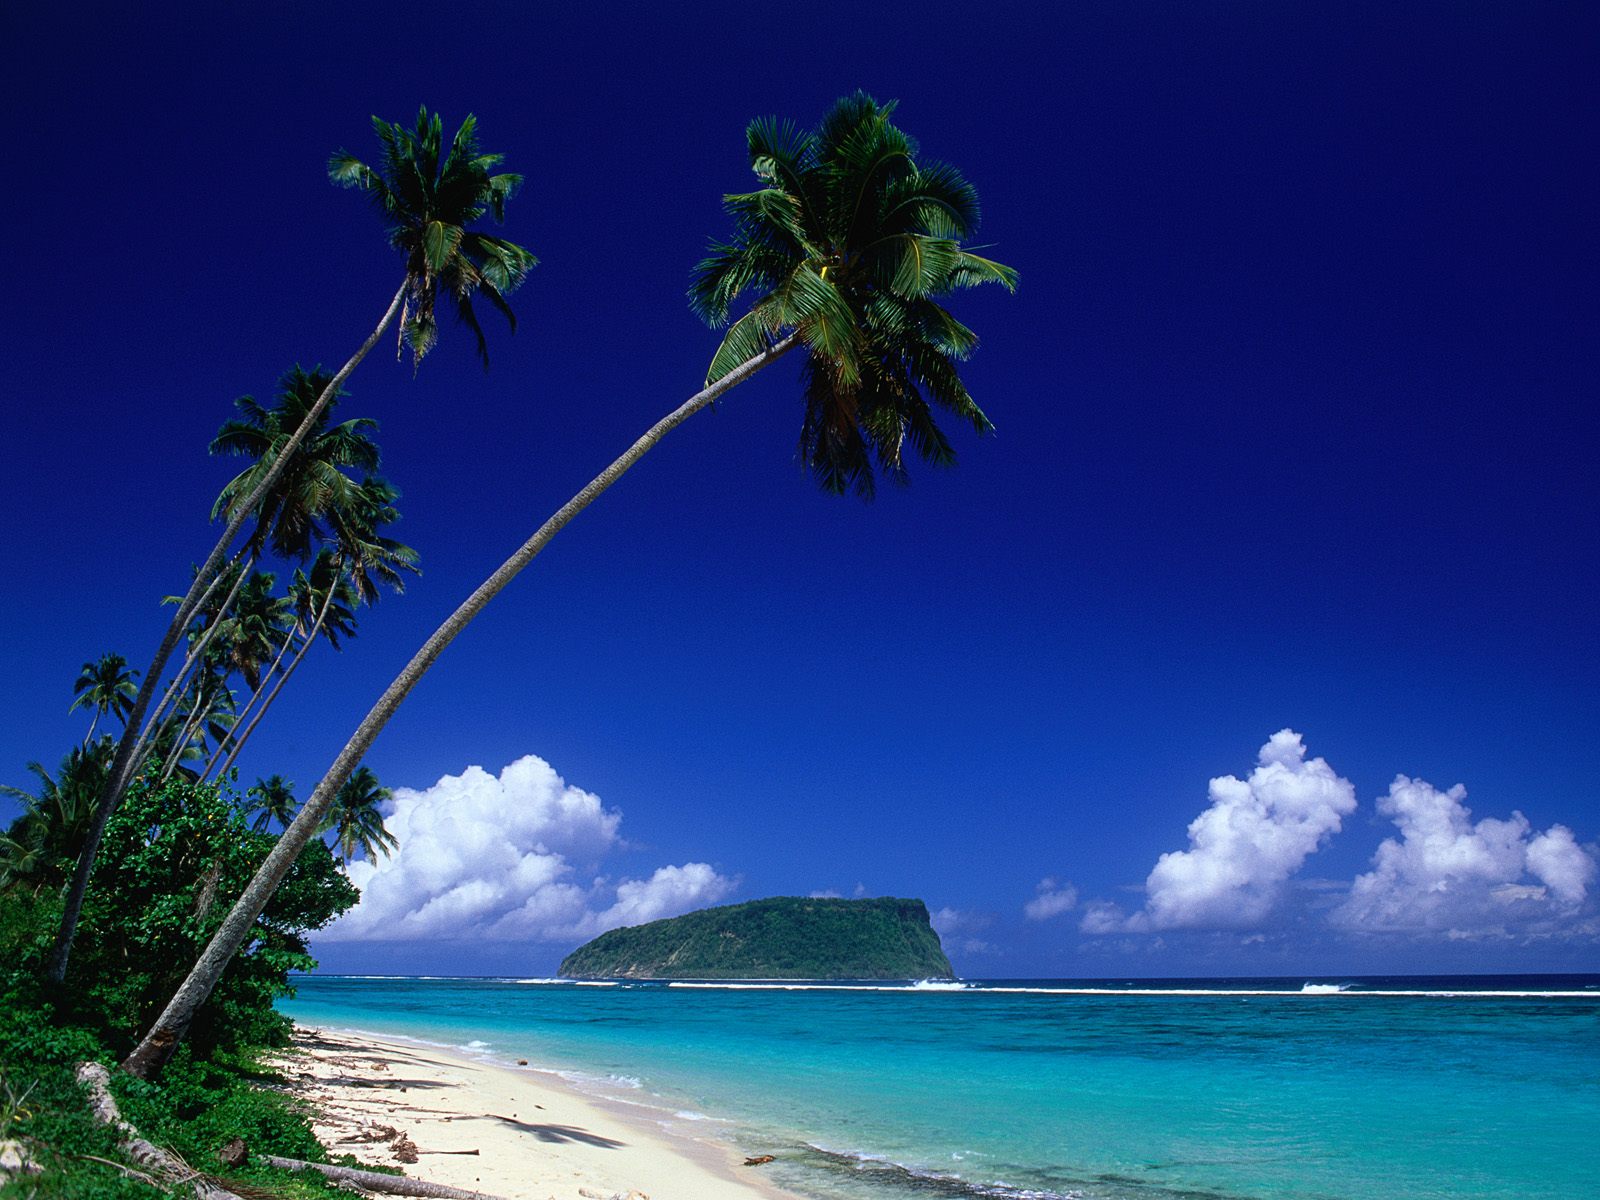 download beach live wallpaper apk which is under the beach wallpapers